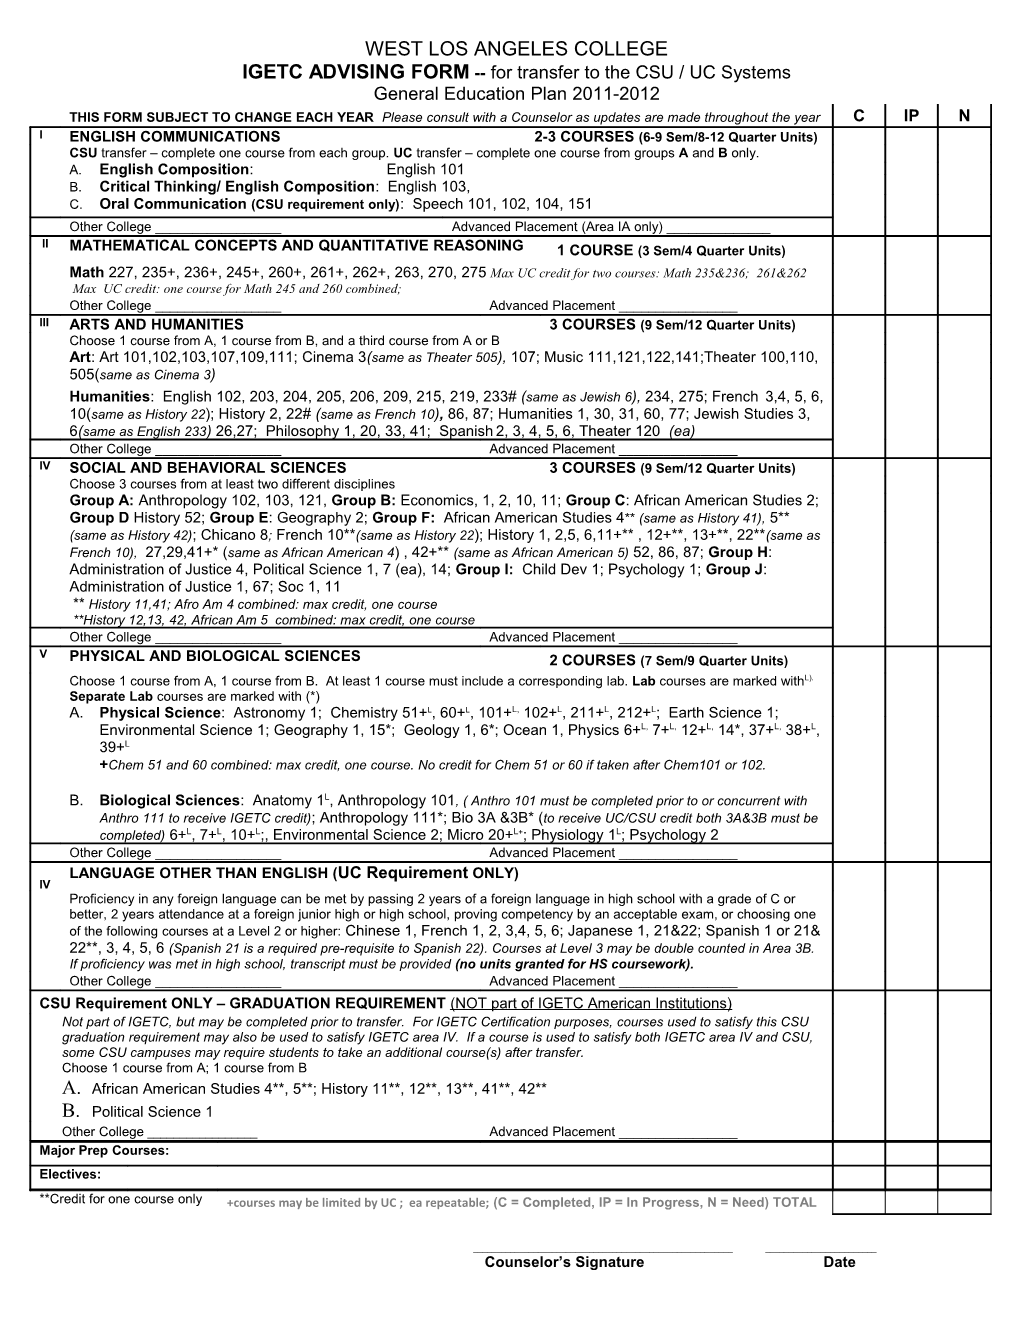 IGETC ADVISING FORM for Transfer to the CSU / UC Systems